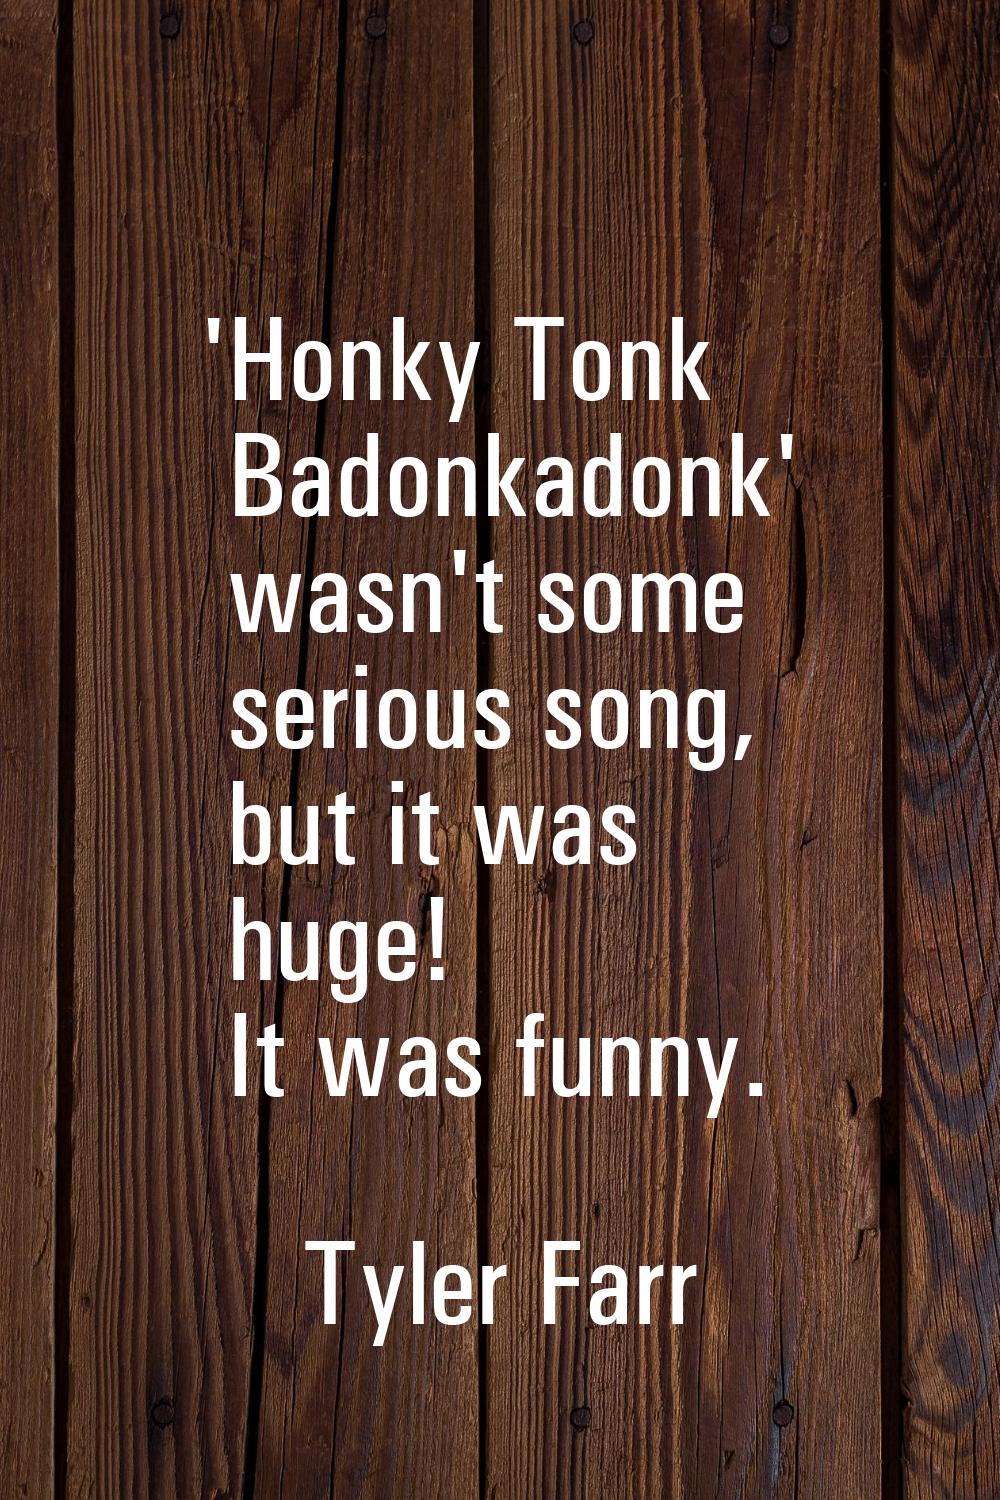 'Honky Tonk Badonkadonk' wasn't some serious song, but it was huge! It was funny.